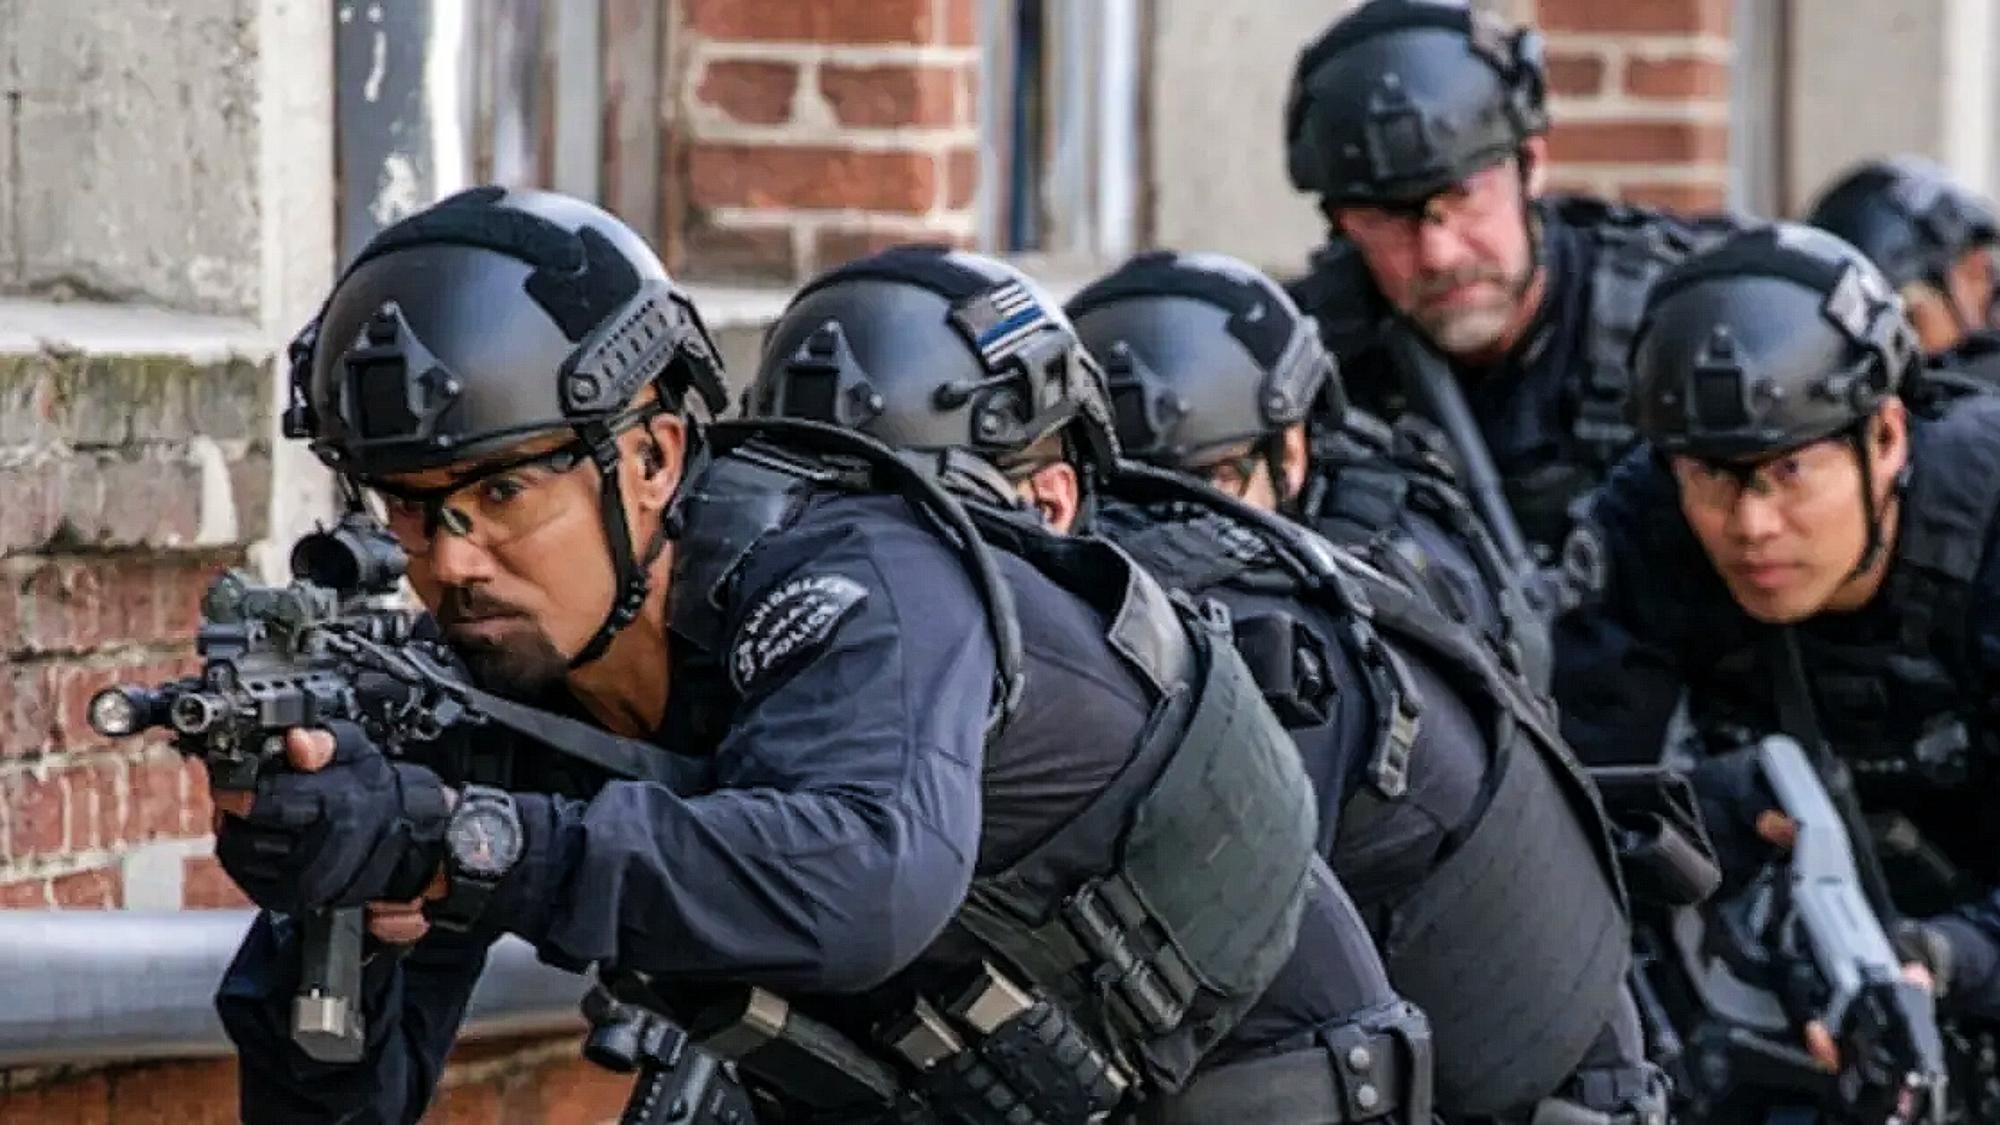 The cast of SWAT